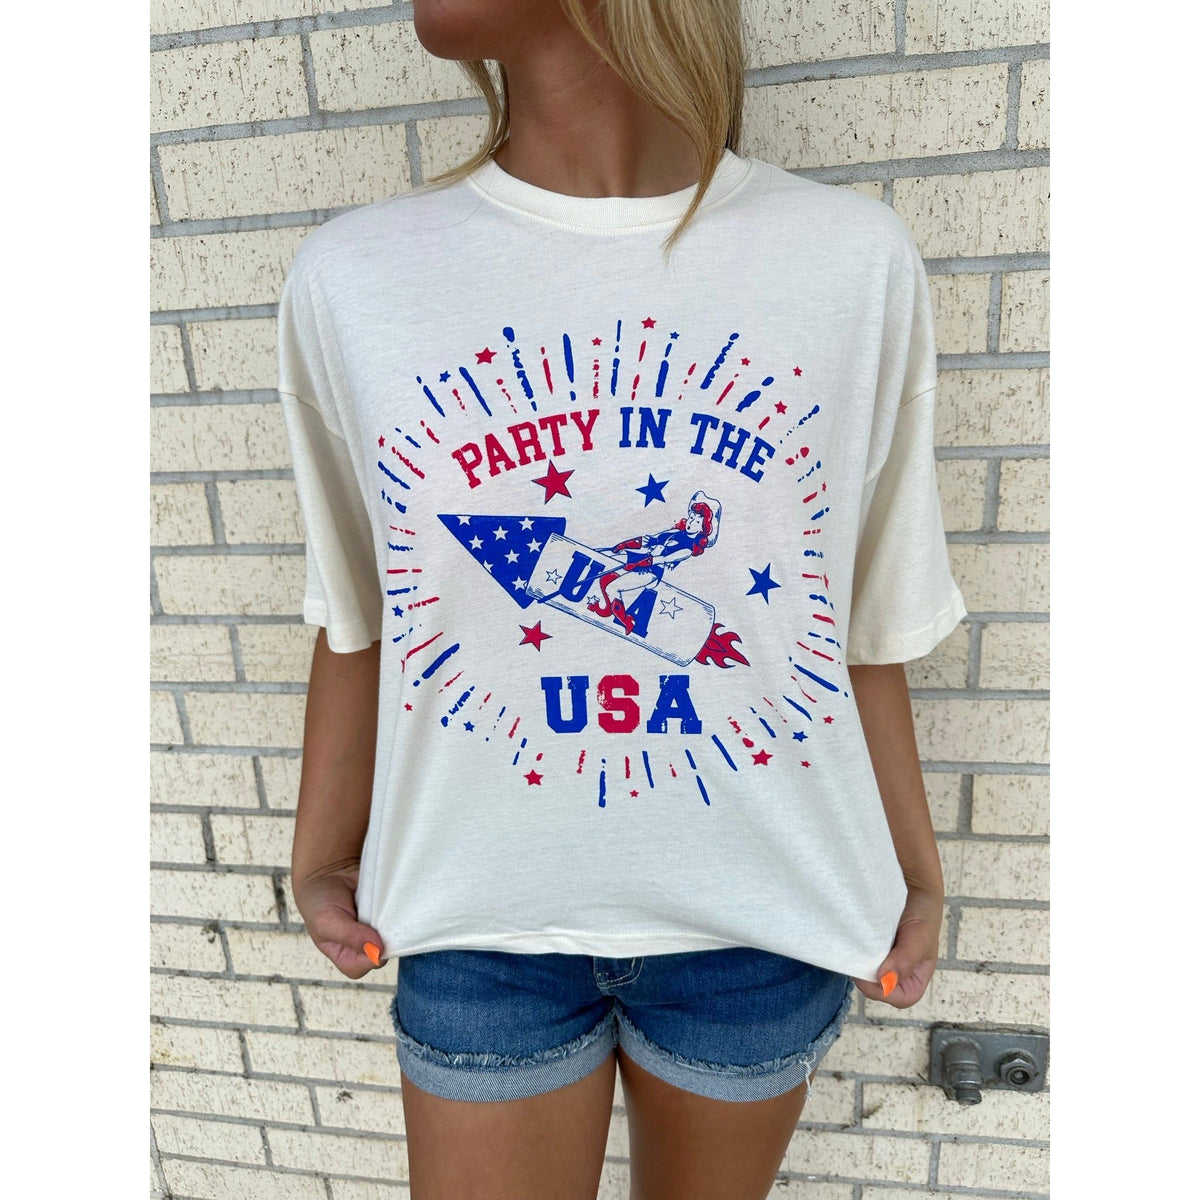 Long Crop Party in the USA top